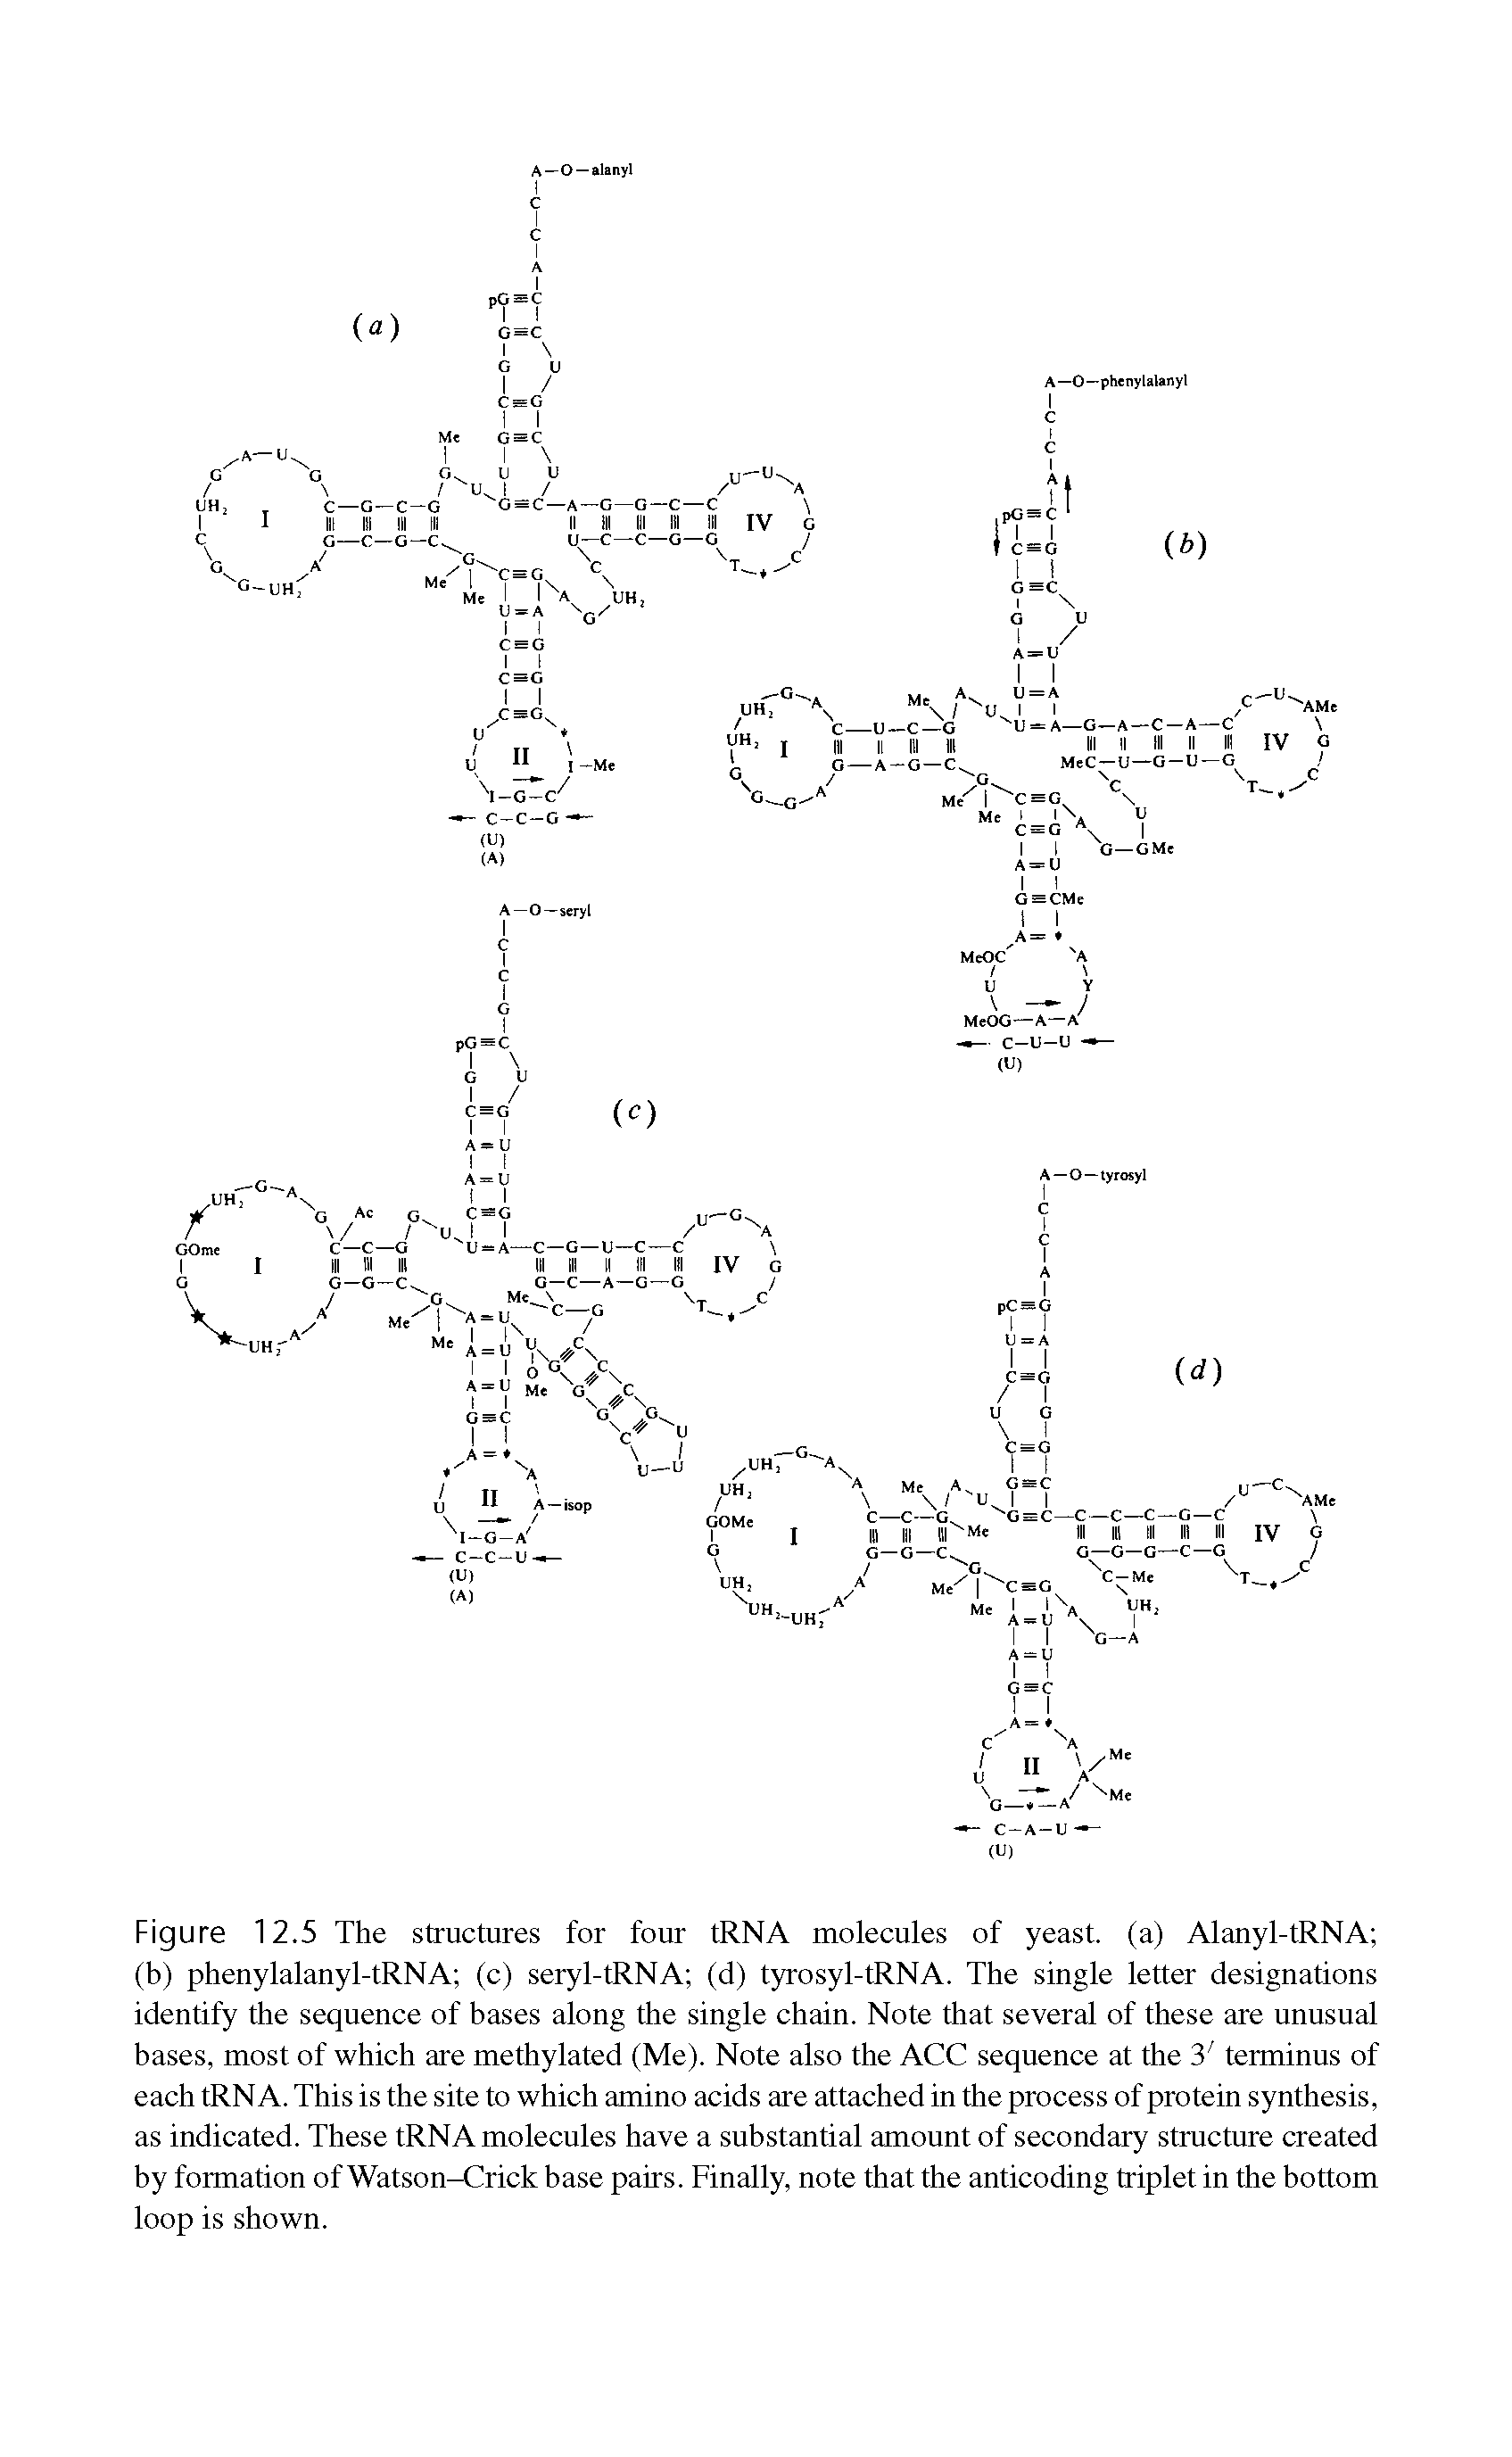 Figure 12.5 The structures for four tRNA molecules of yeast, (a) Alanyl-tRNA (b) phenylalanyl-tRNA (c) seryl-tRNA (d) tyrosyl-tRNA. The single letter designations identify the sequence of bases along the single chain. Note that several of these are unusual bases, most of which are methylated (Me). Note also the ACC sequence at the 3 terminus of each tRNA. This is the site to which amino acids are attached in the process of protein synthesis, as indicated. These tRNA molecules have a substantial amount of secondary structure created by formation of Watson-Crick base pairs. Finally, note that the anticoding triplet in the bottom loop is shown.